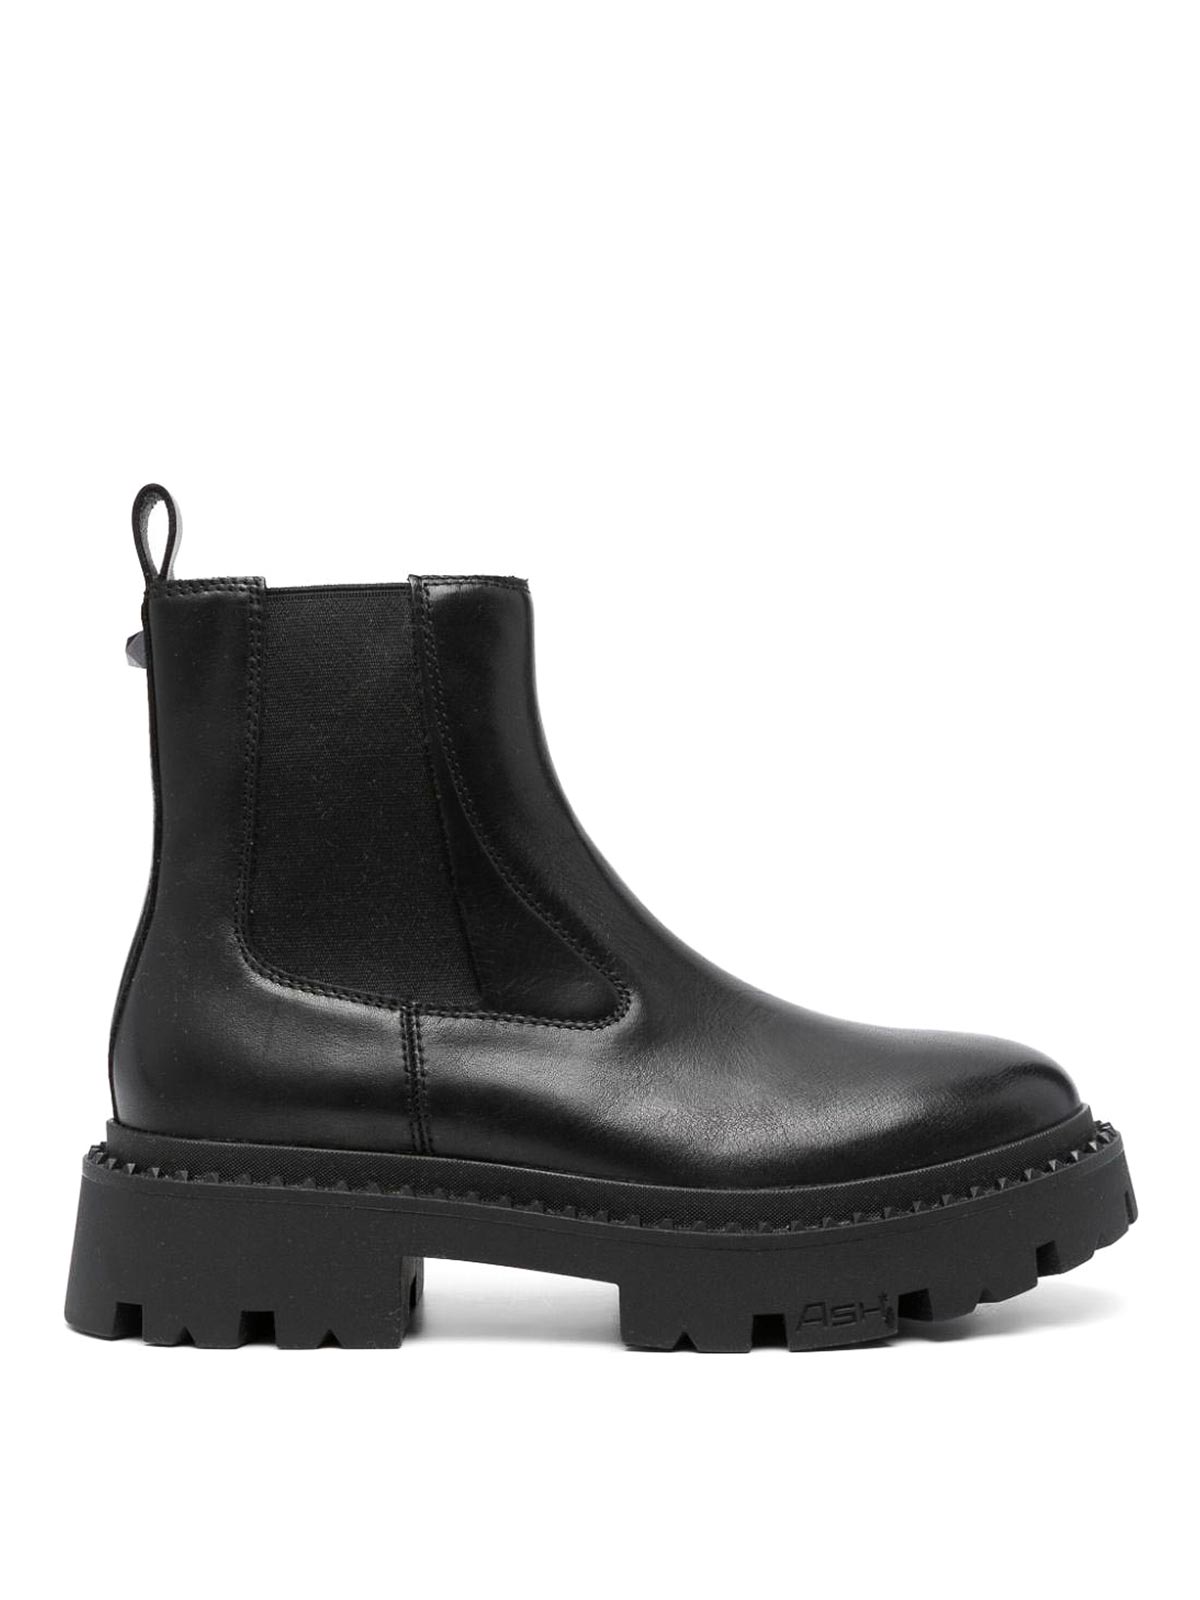 Ash Chelsea Boots In Black